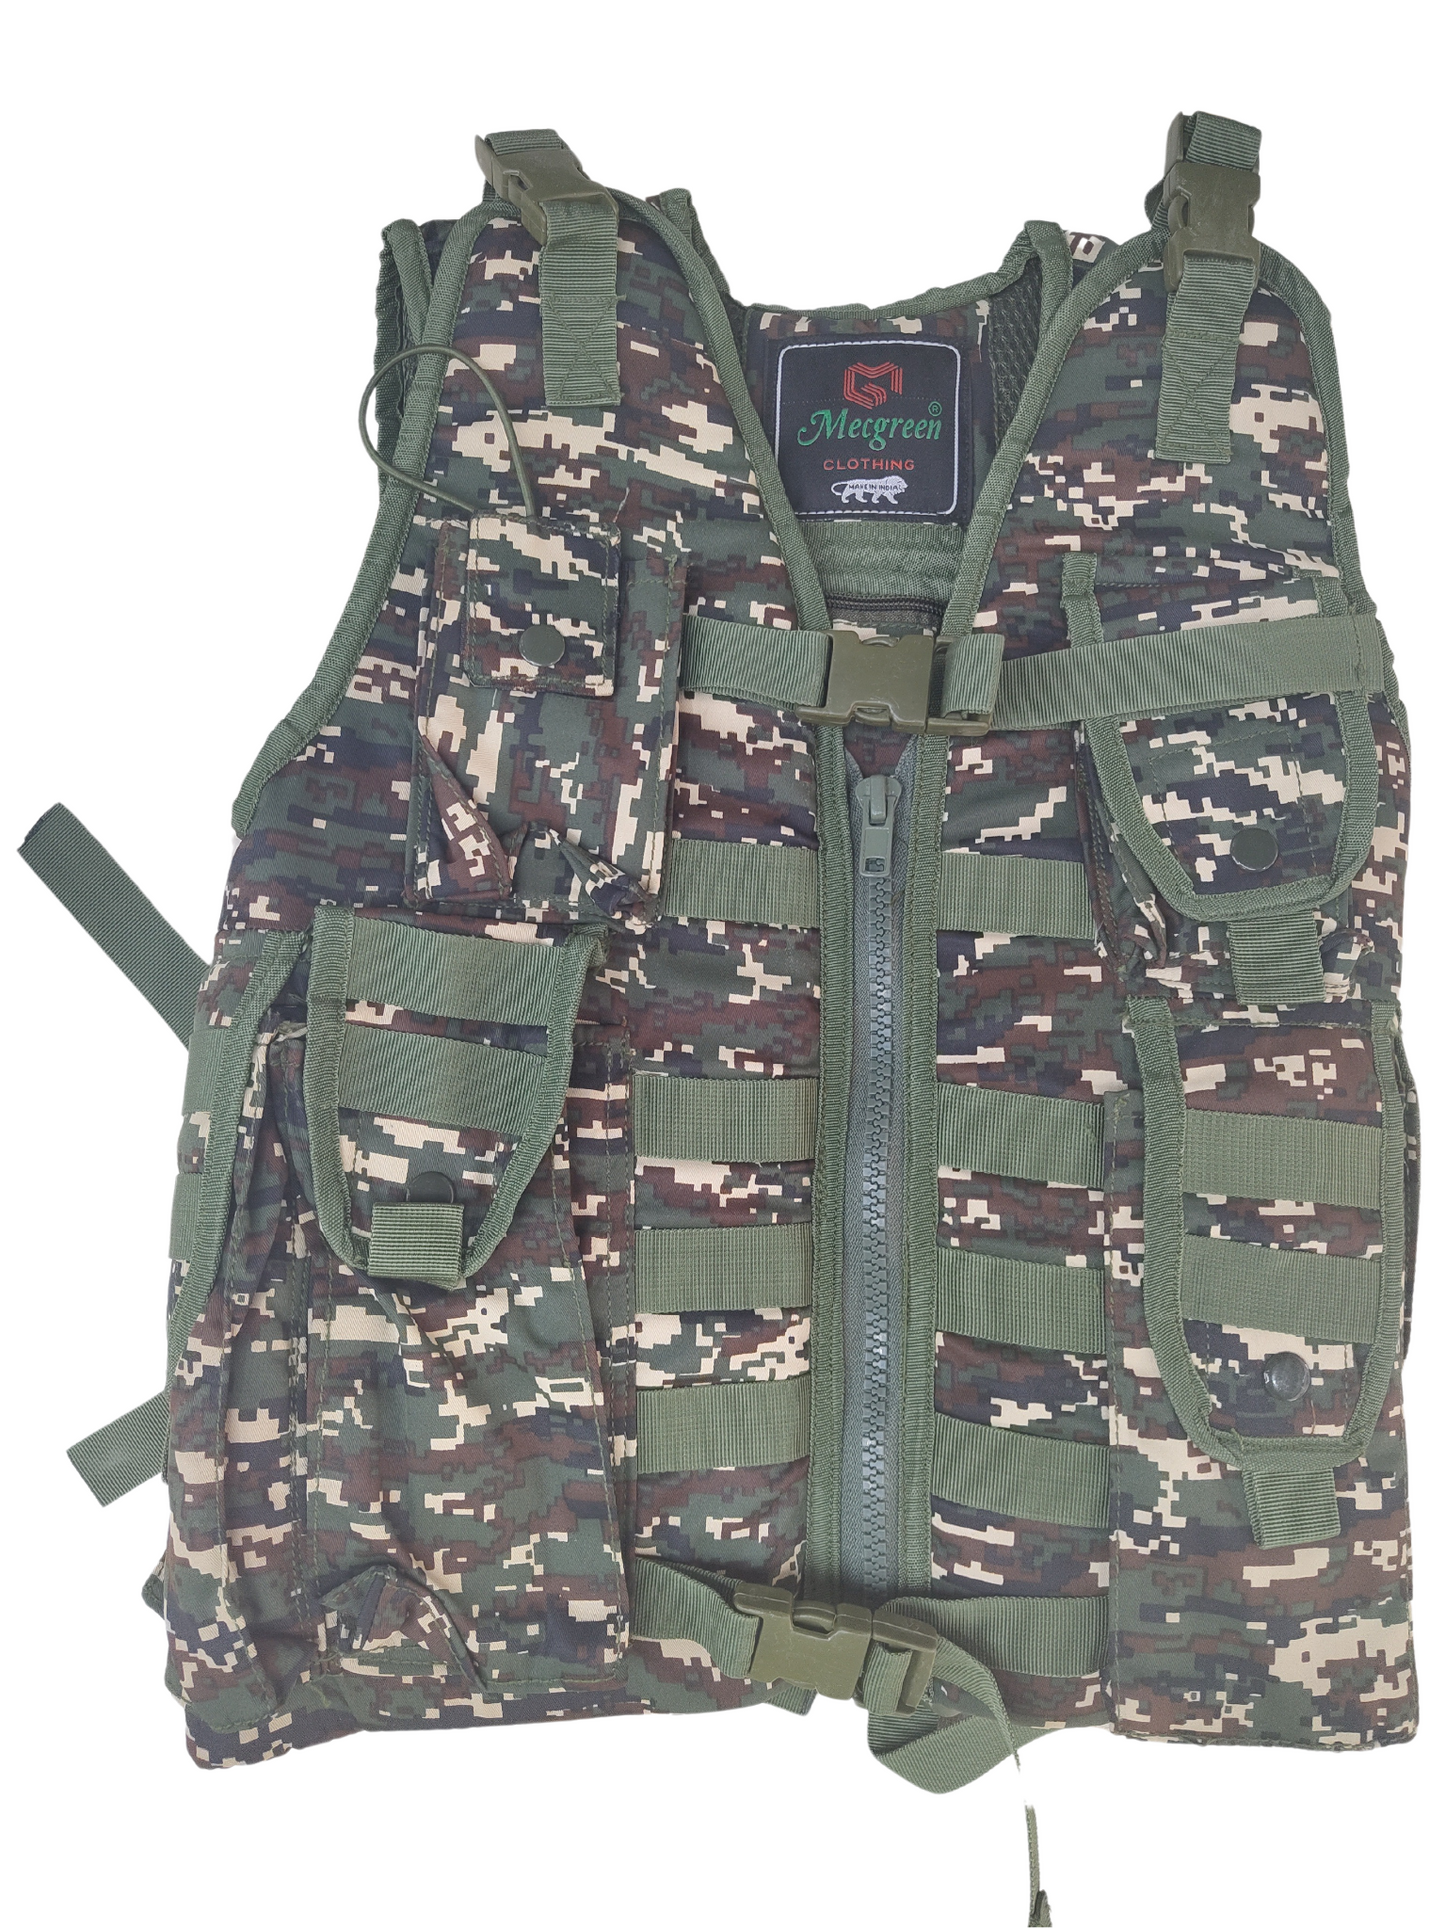 CRPF TACTICAL VEST POUCH WITH Bulletproof JACKET COVER